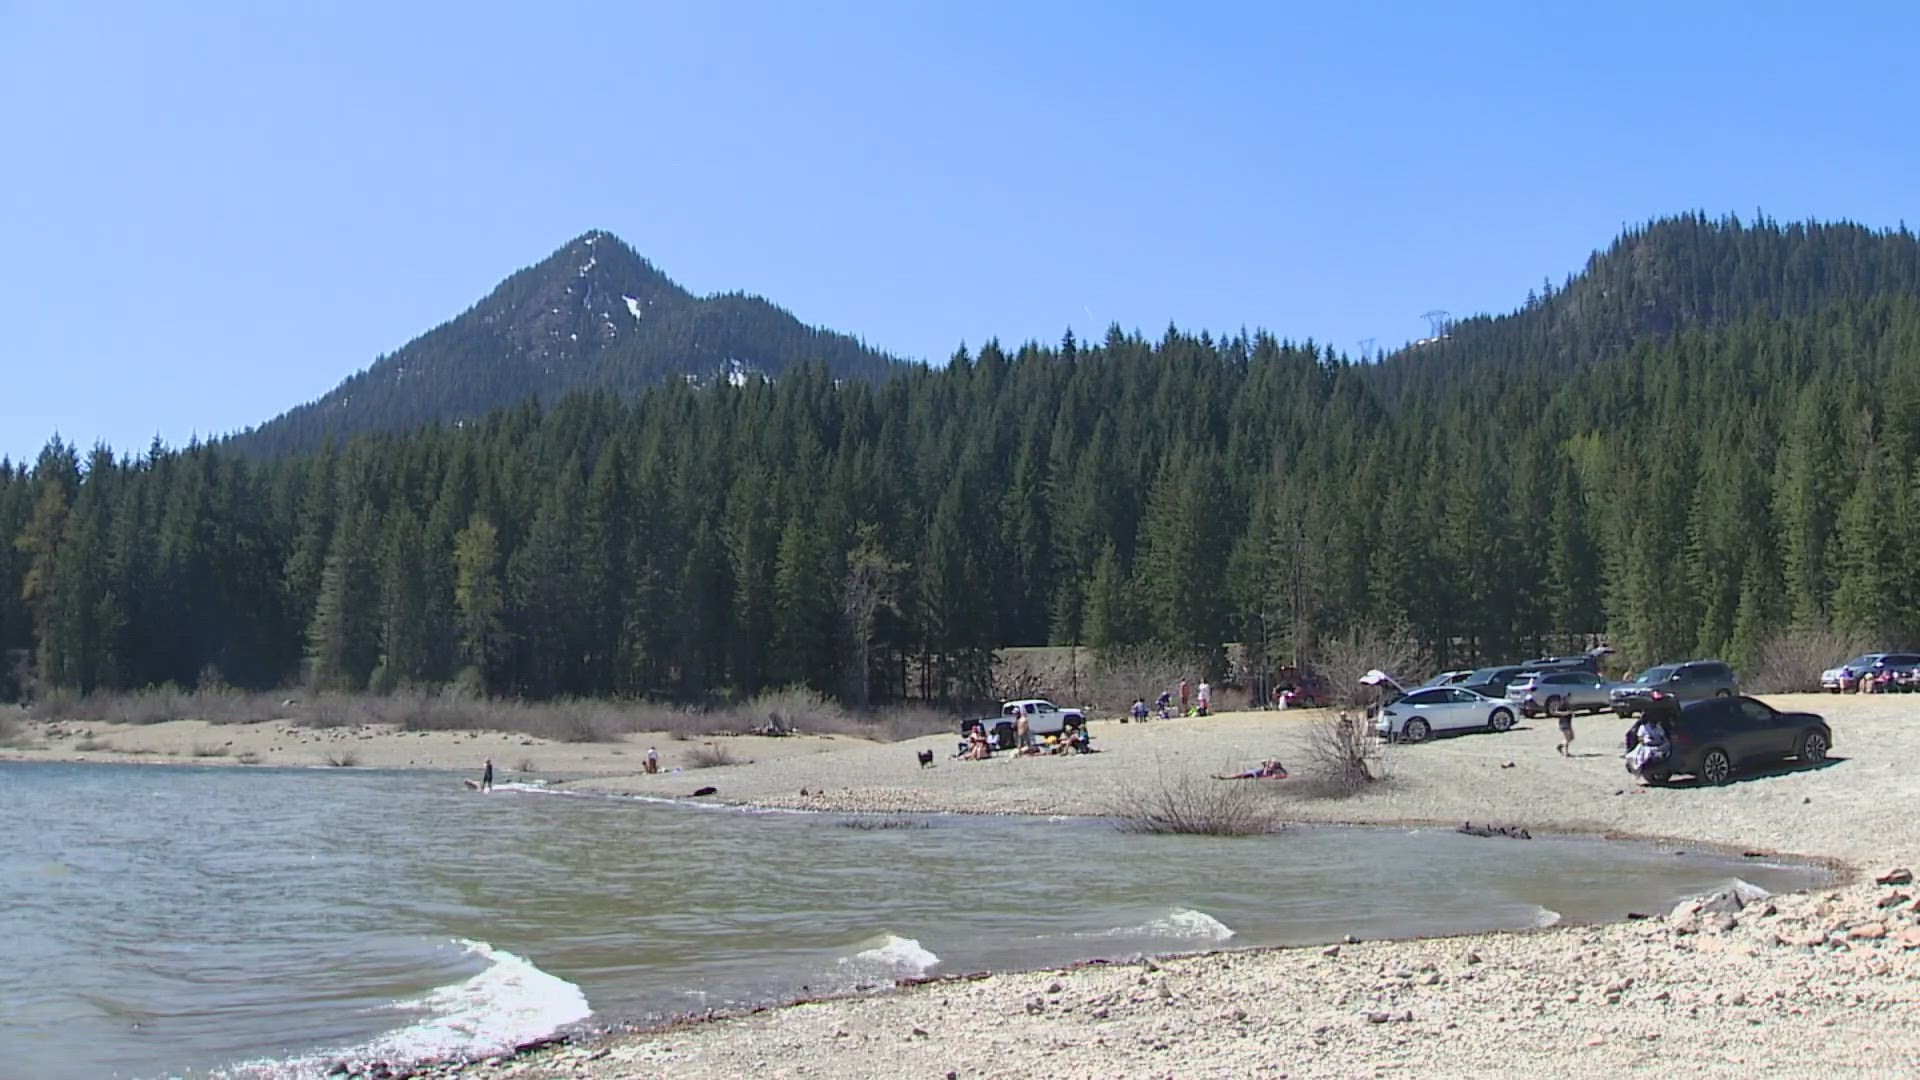 Snoqualmie Pass Fire and Rescue Chief Jay Wiseman said avalanches in the mountains and cold water in recreation areas are risk factors with the early heat wave.